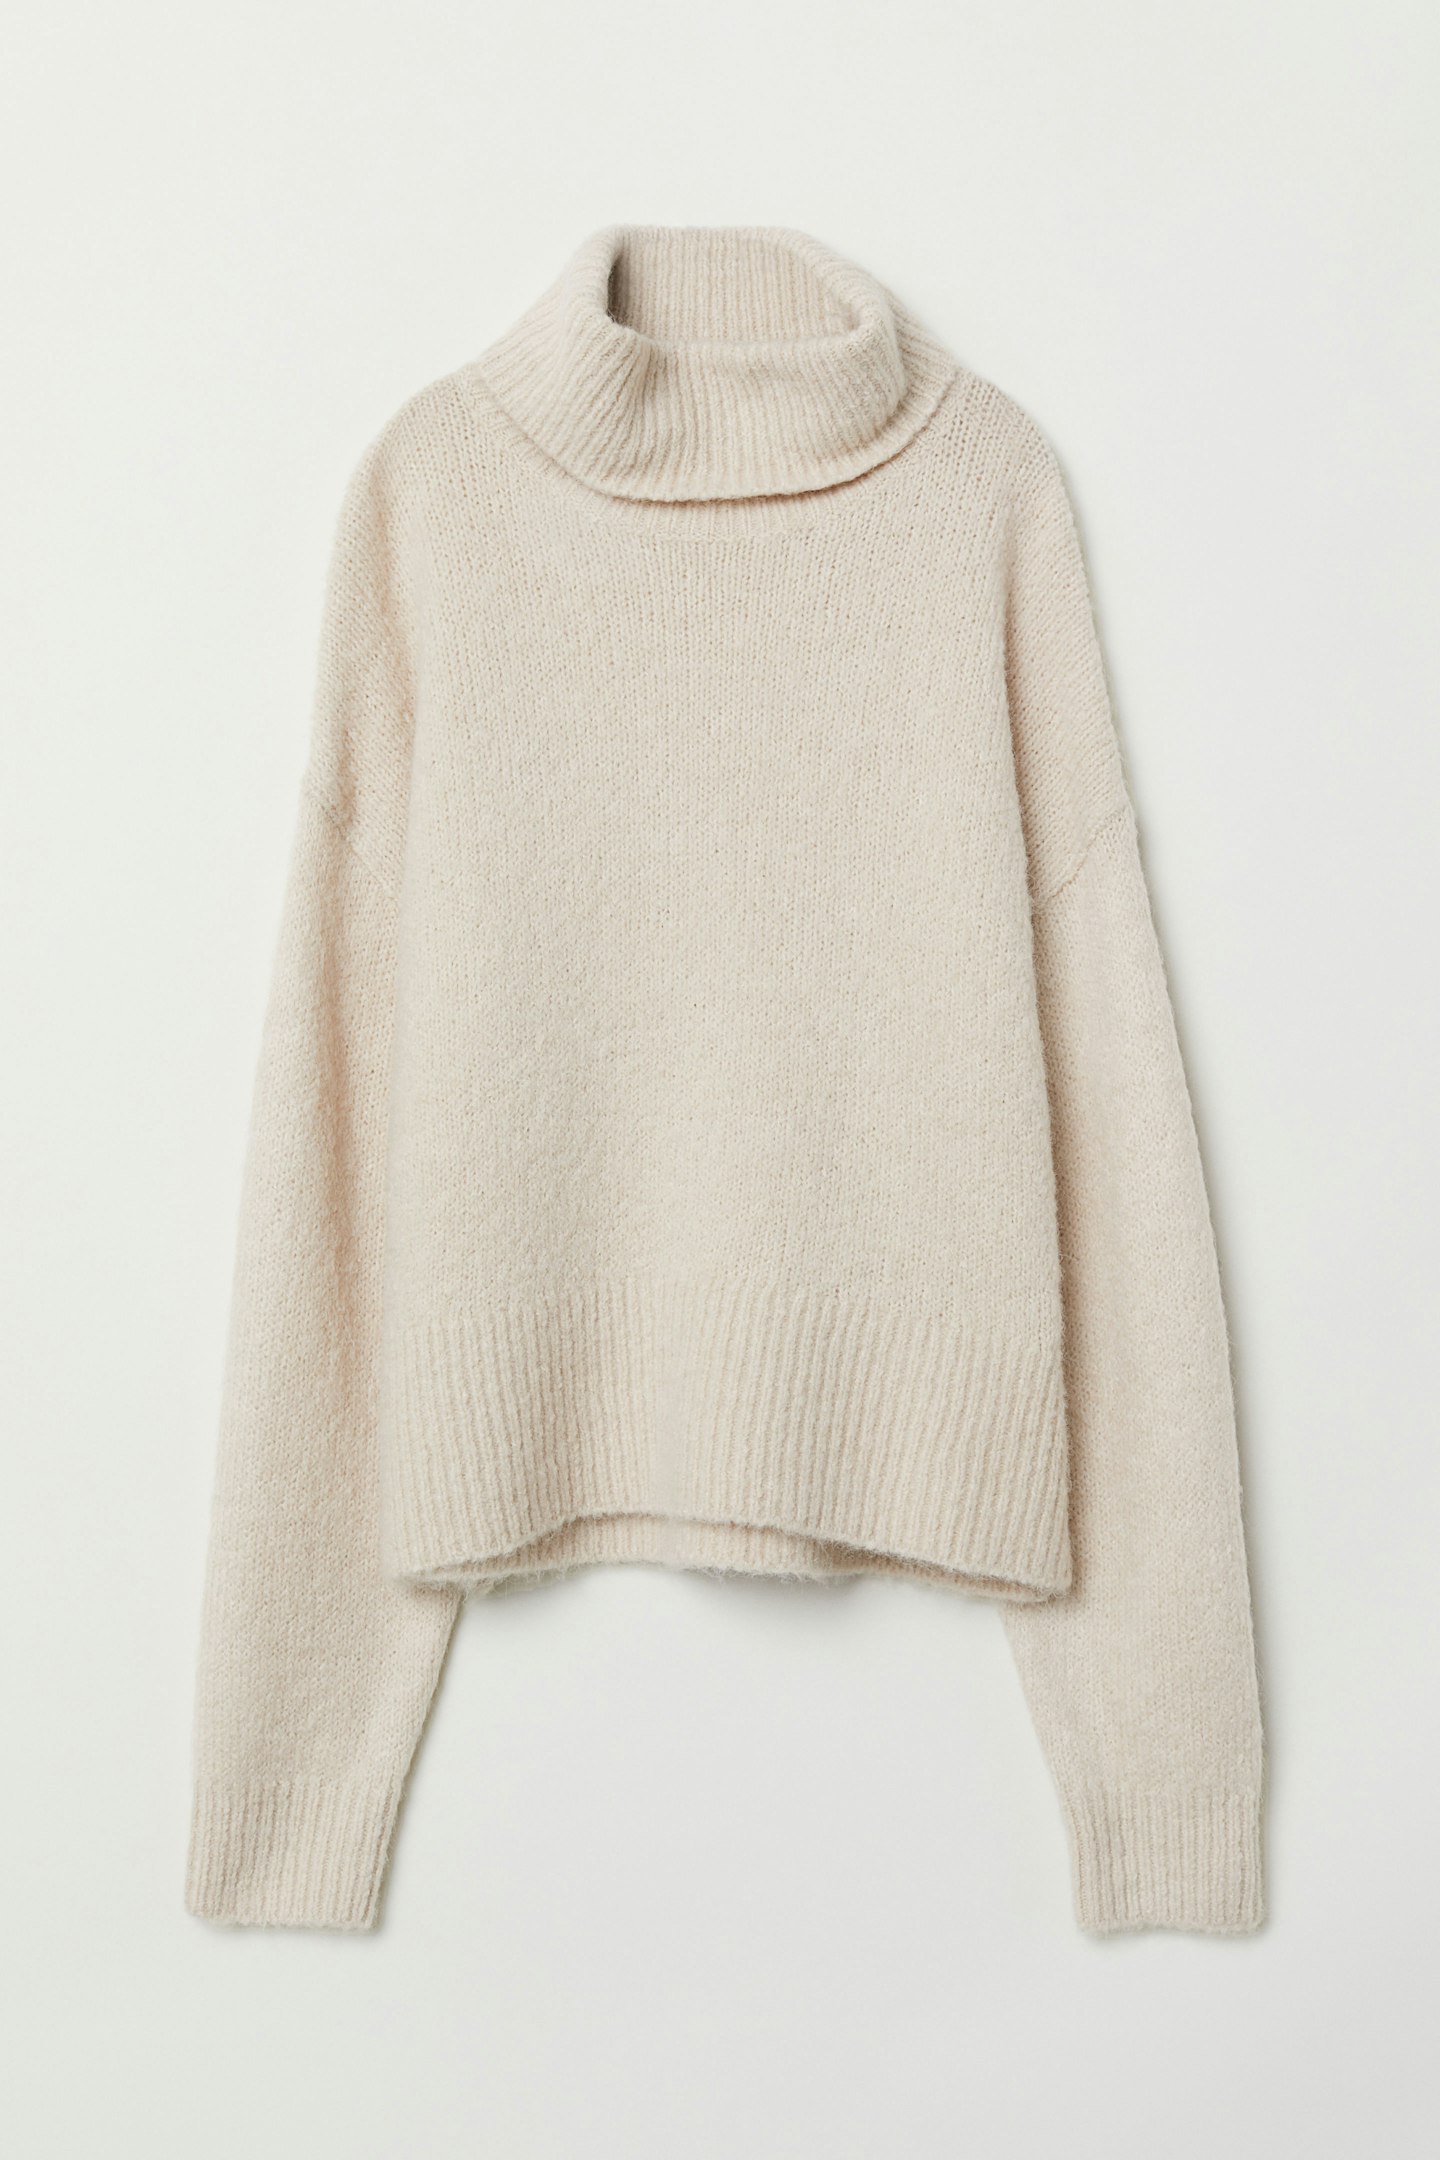 H&M, Knitted Polo-Neck Jumper, £24.99